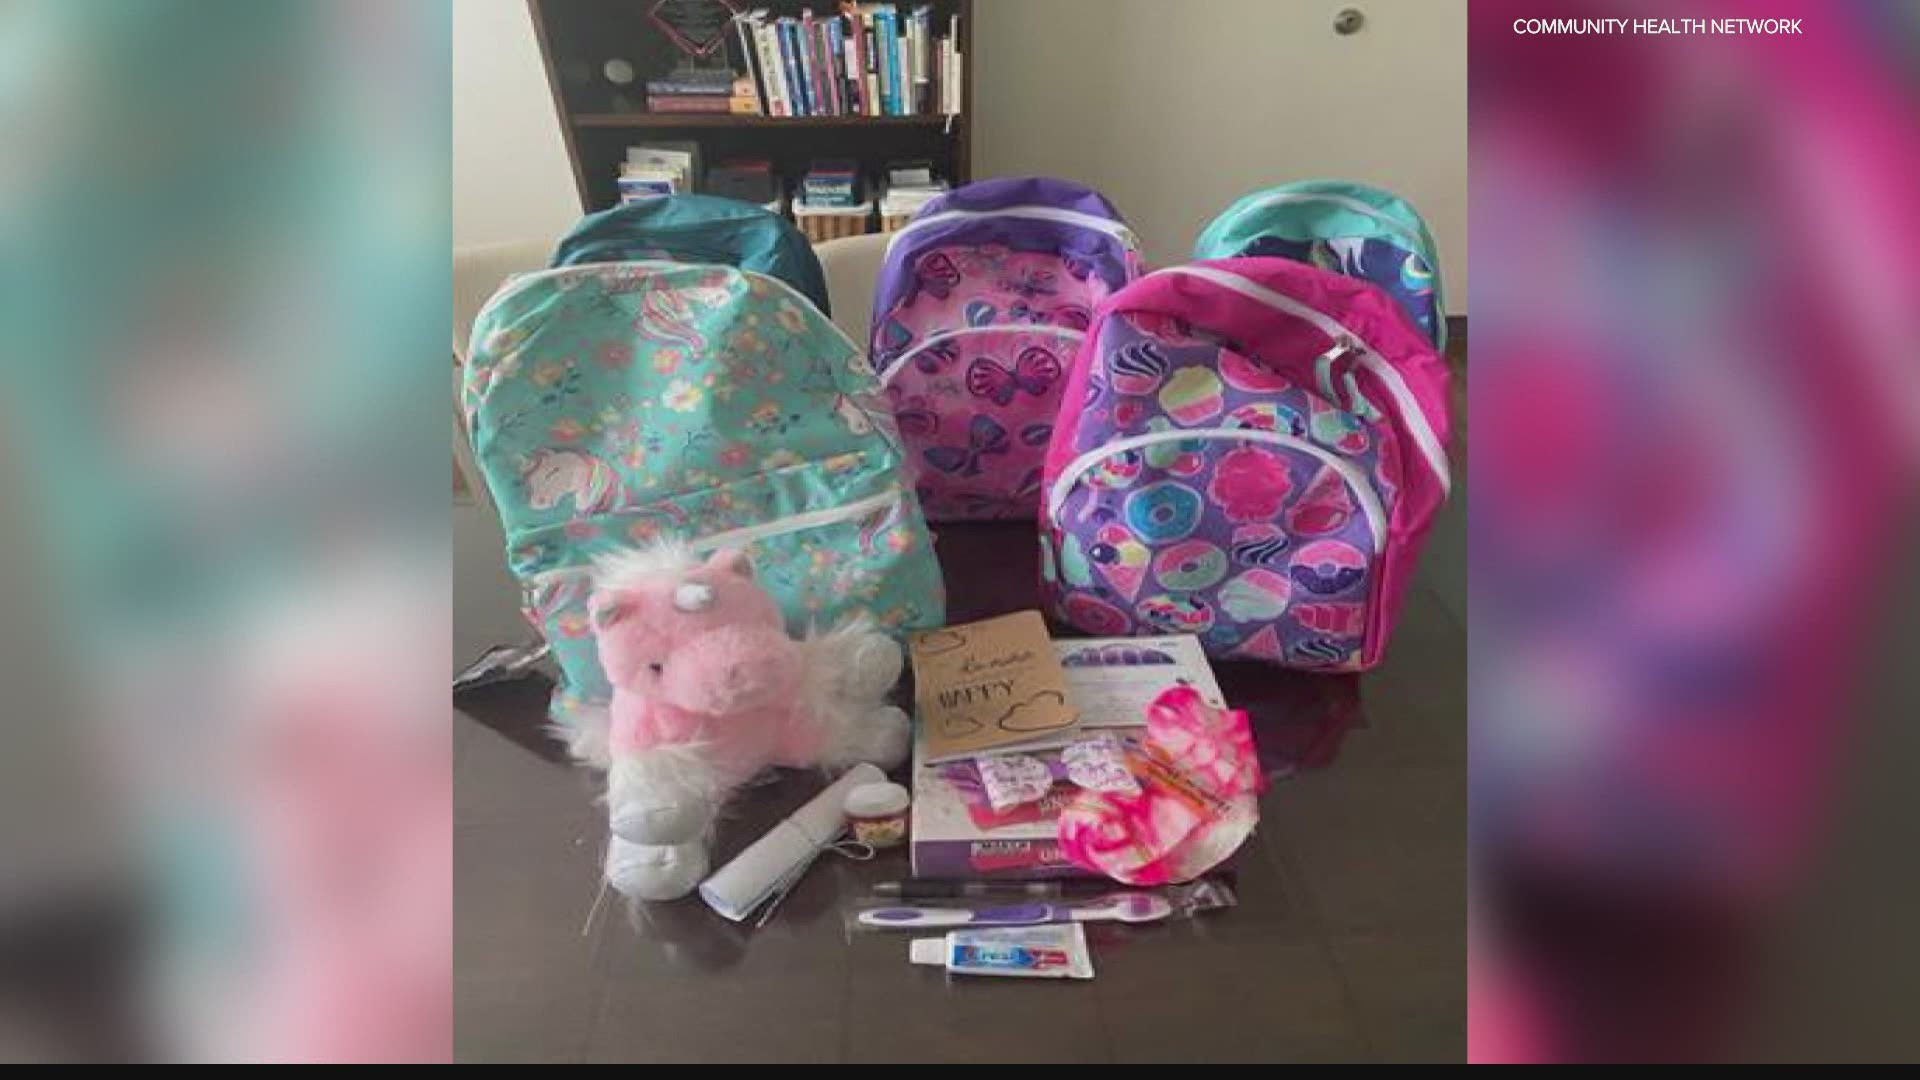 A 7-year-old girl from Anderson is making a difference in the lives of strangers who are going through a tough time.